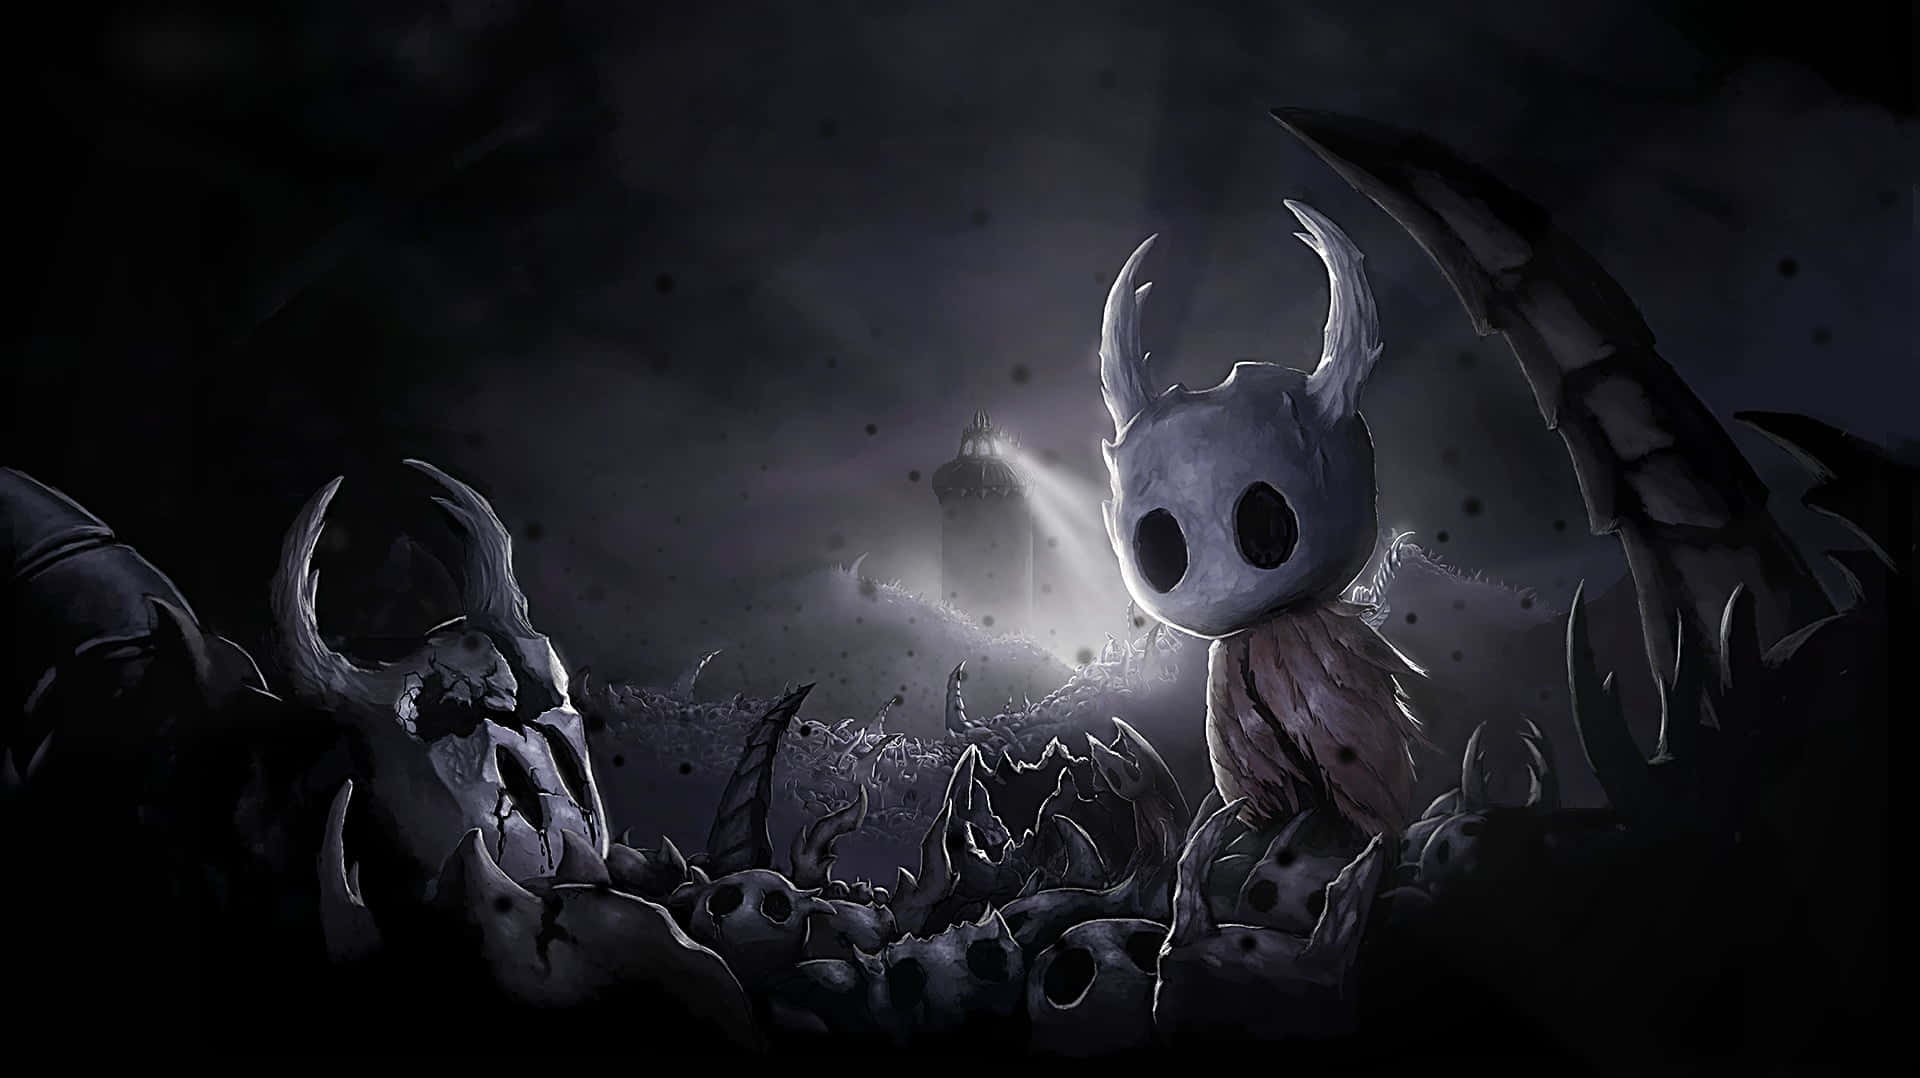 Adventure and discovery await in the beautiful Hollow Knight world